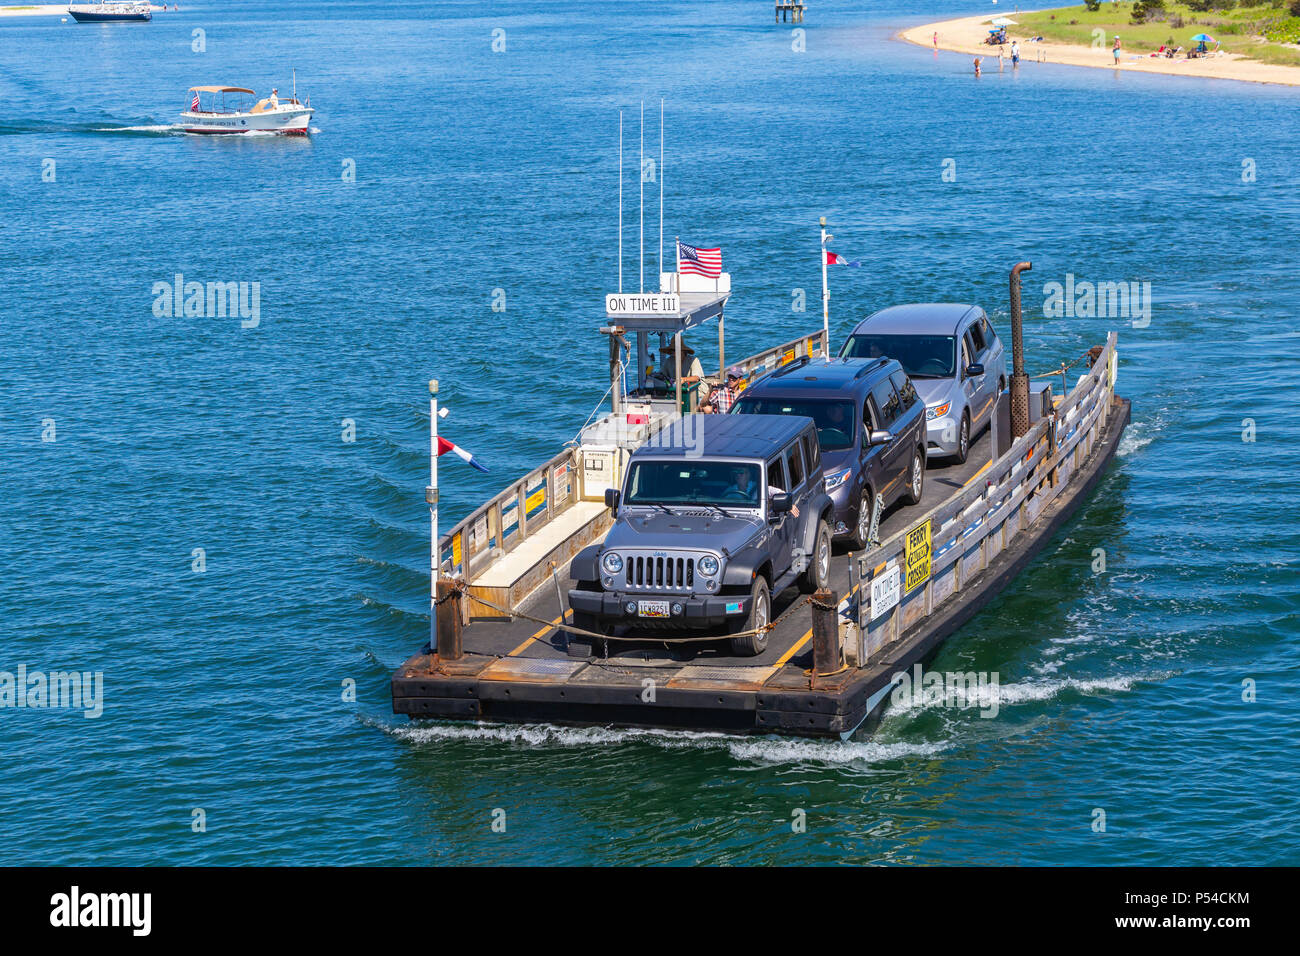 Chappy Ferry 'On Time III' arrives with cars and passengers from Chappaquiddick Island in Edgartown, Massachusetts on Martha's Vineyard. Stock Photo